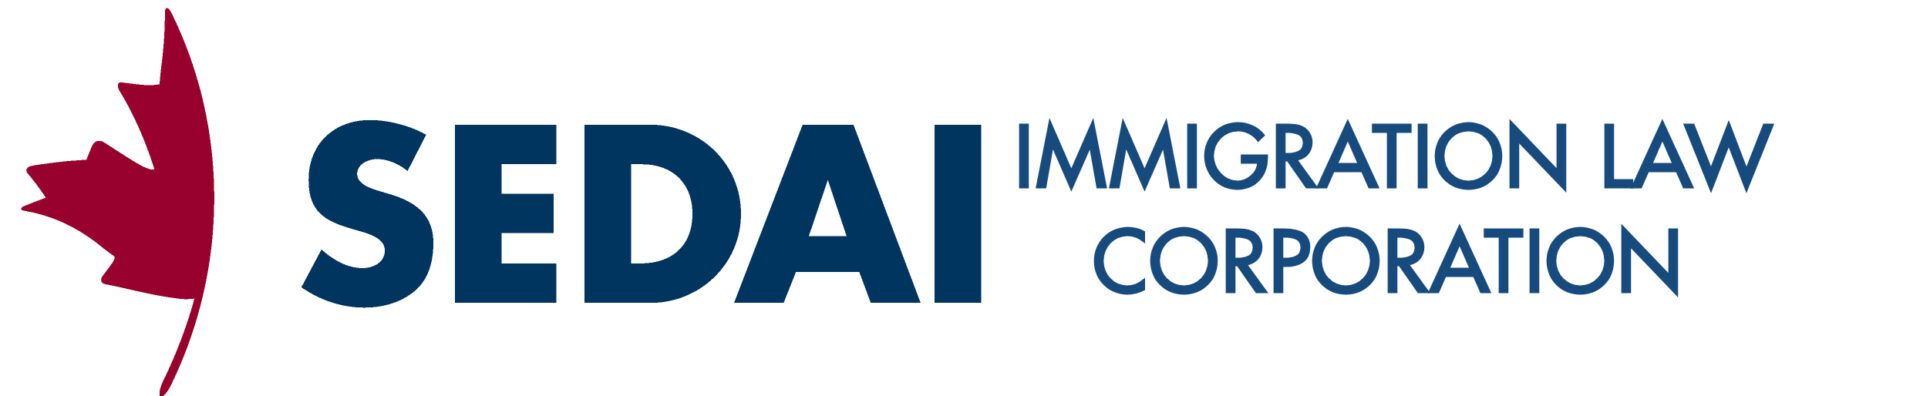 A blue and white logo of the nai immigration corporation.